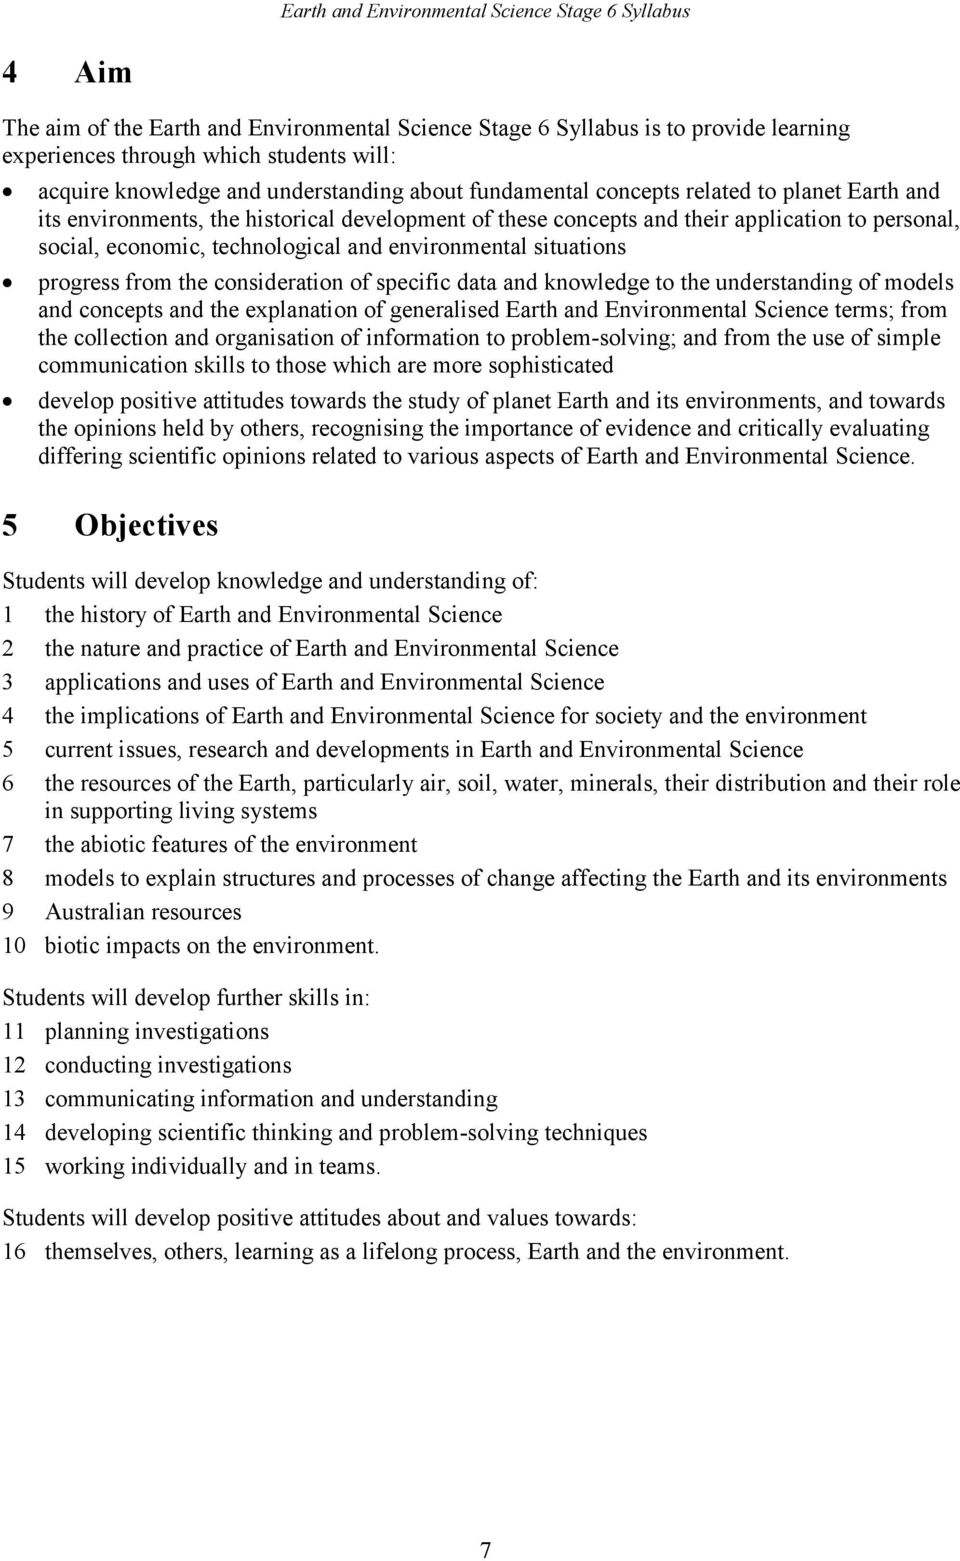 from the consideration of specific data and knowledge to the understanding of models and concepts and the explanation of generalised Earth and Environmental Science terms; from the collection and